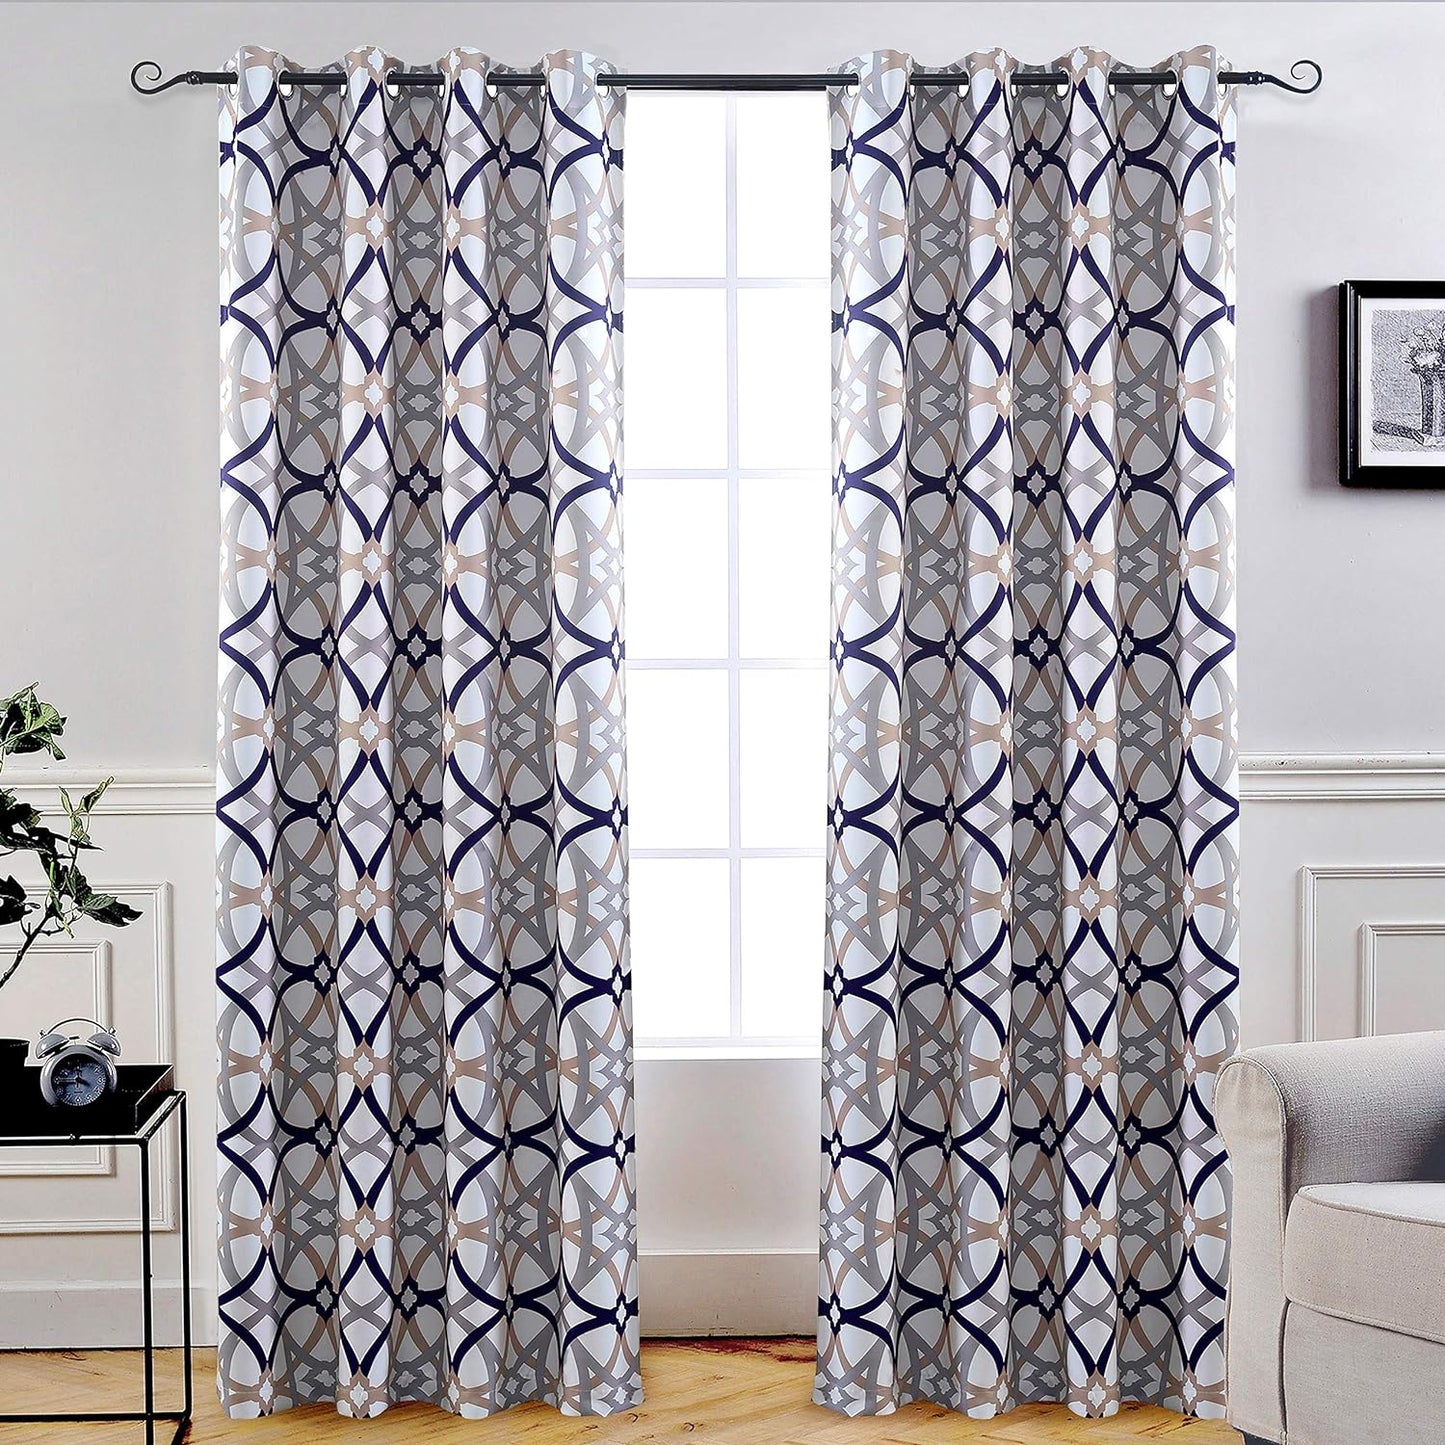 Driftaway Alexander Thermal Blackout Grommet Unlined Window Curtains Spiral Geo Trellis Pattern Set of 2 Panels Each Size 52 Inch by 84 Inch Red and Gray  DriftAway Navy/Gray 52"X96" 